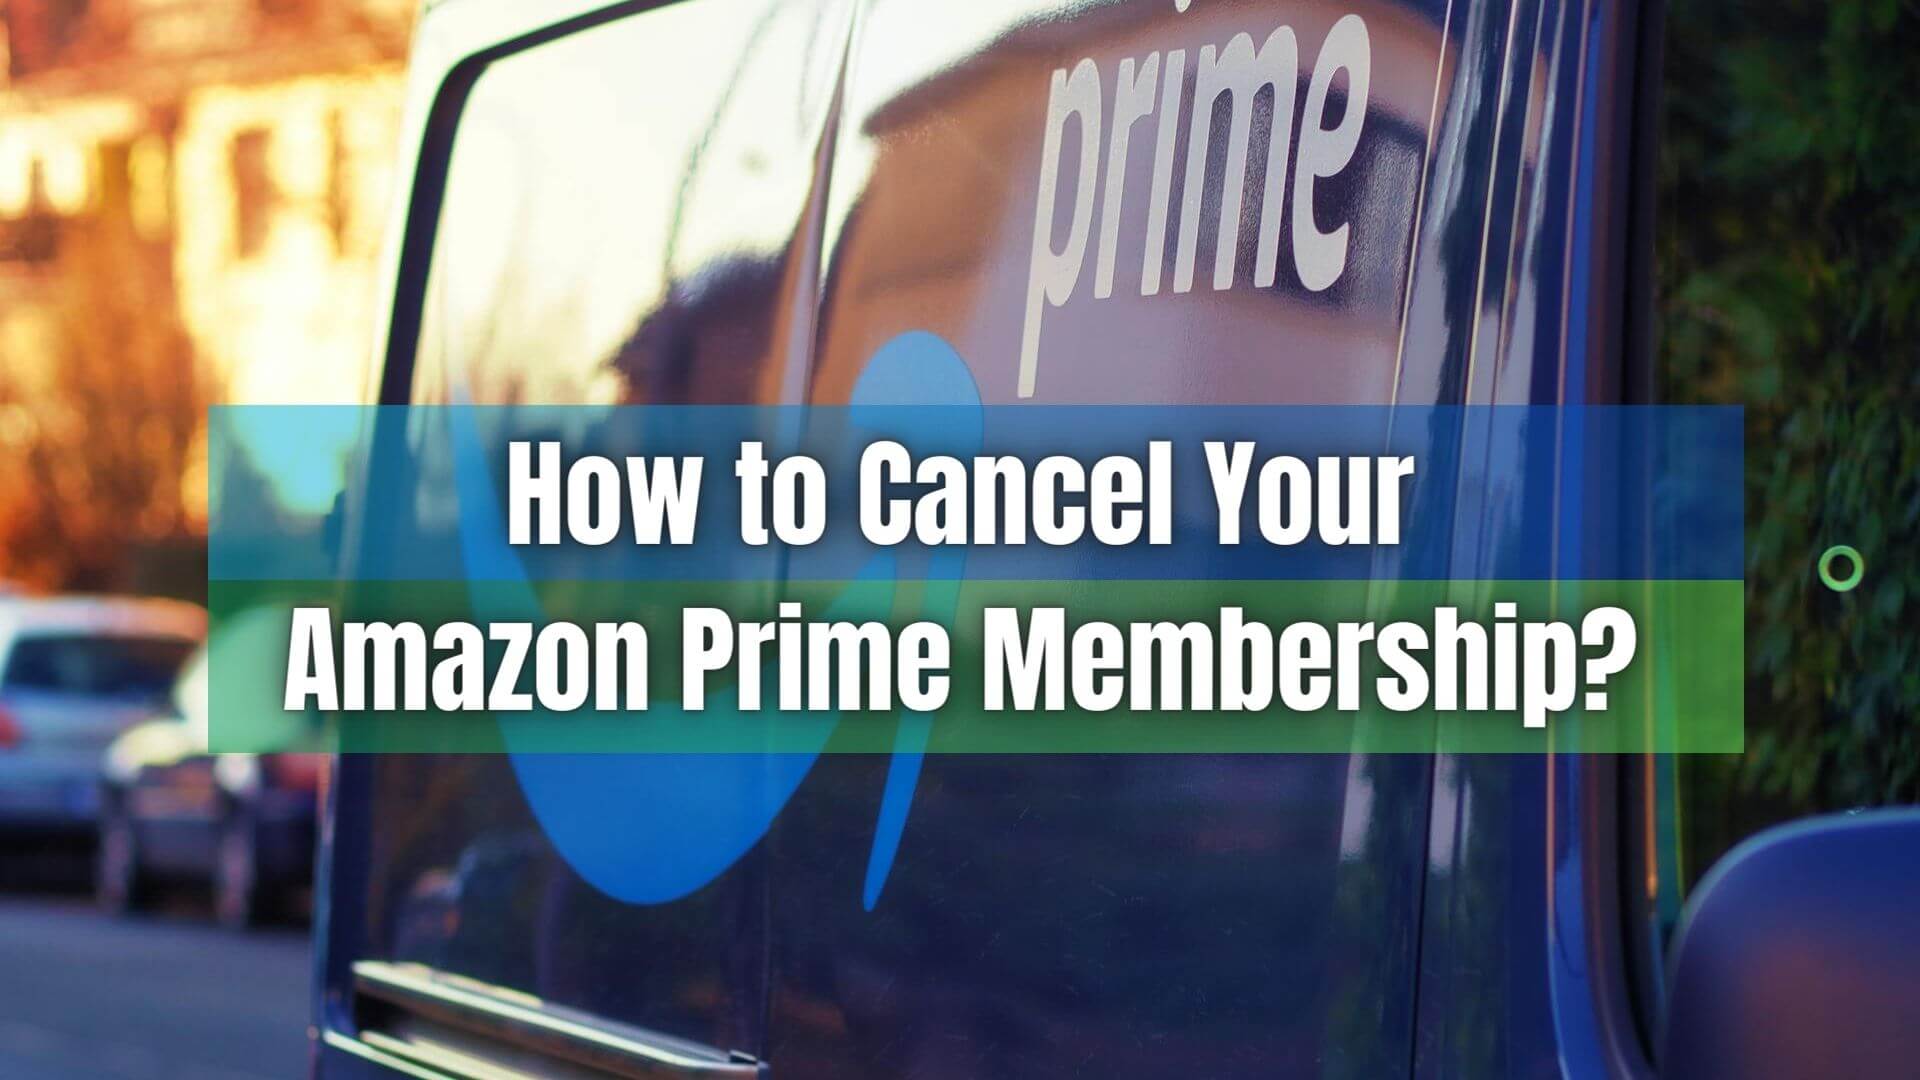 Ensure a smooth cancellation experience! Click here to discover the step-by-step process to cancel your Amazon Prime membership hassle-free.